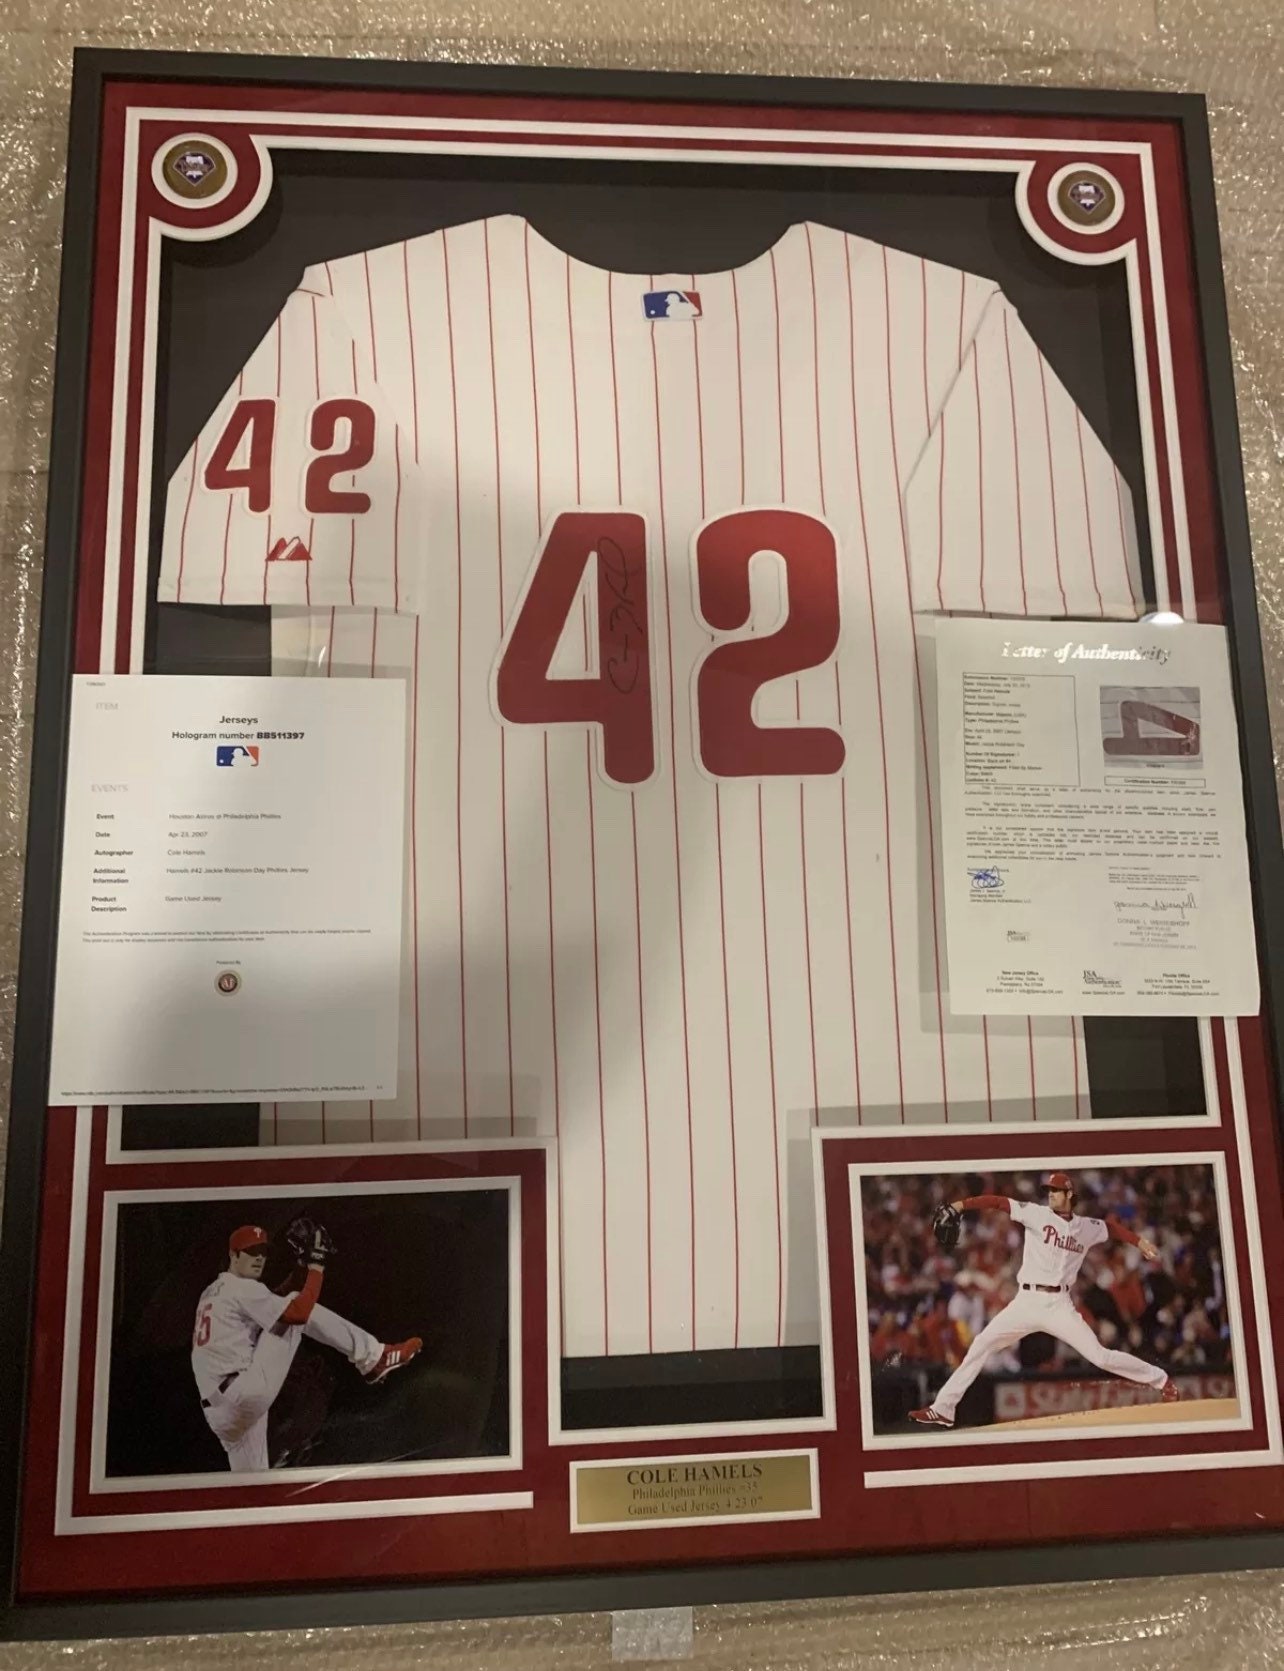 MemorabiliaAddicts Cole Hamels Autograph Signed Phillies Robinson Game used Jersey Framed JSA